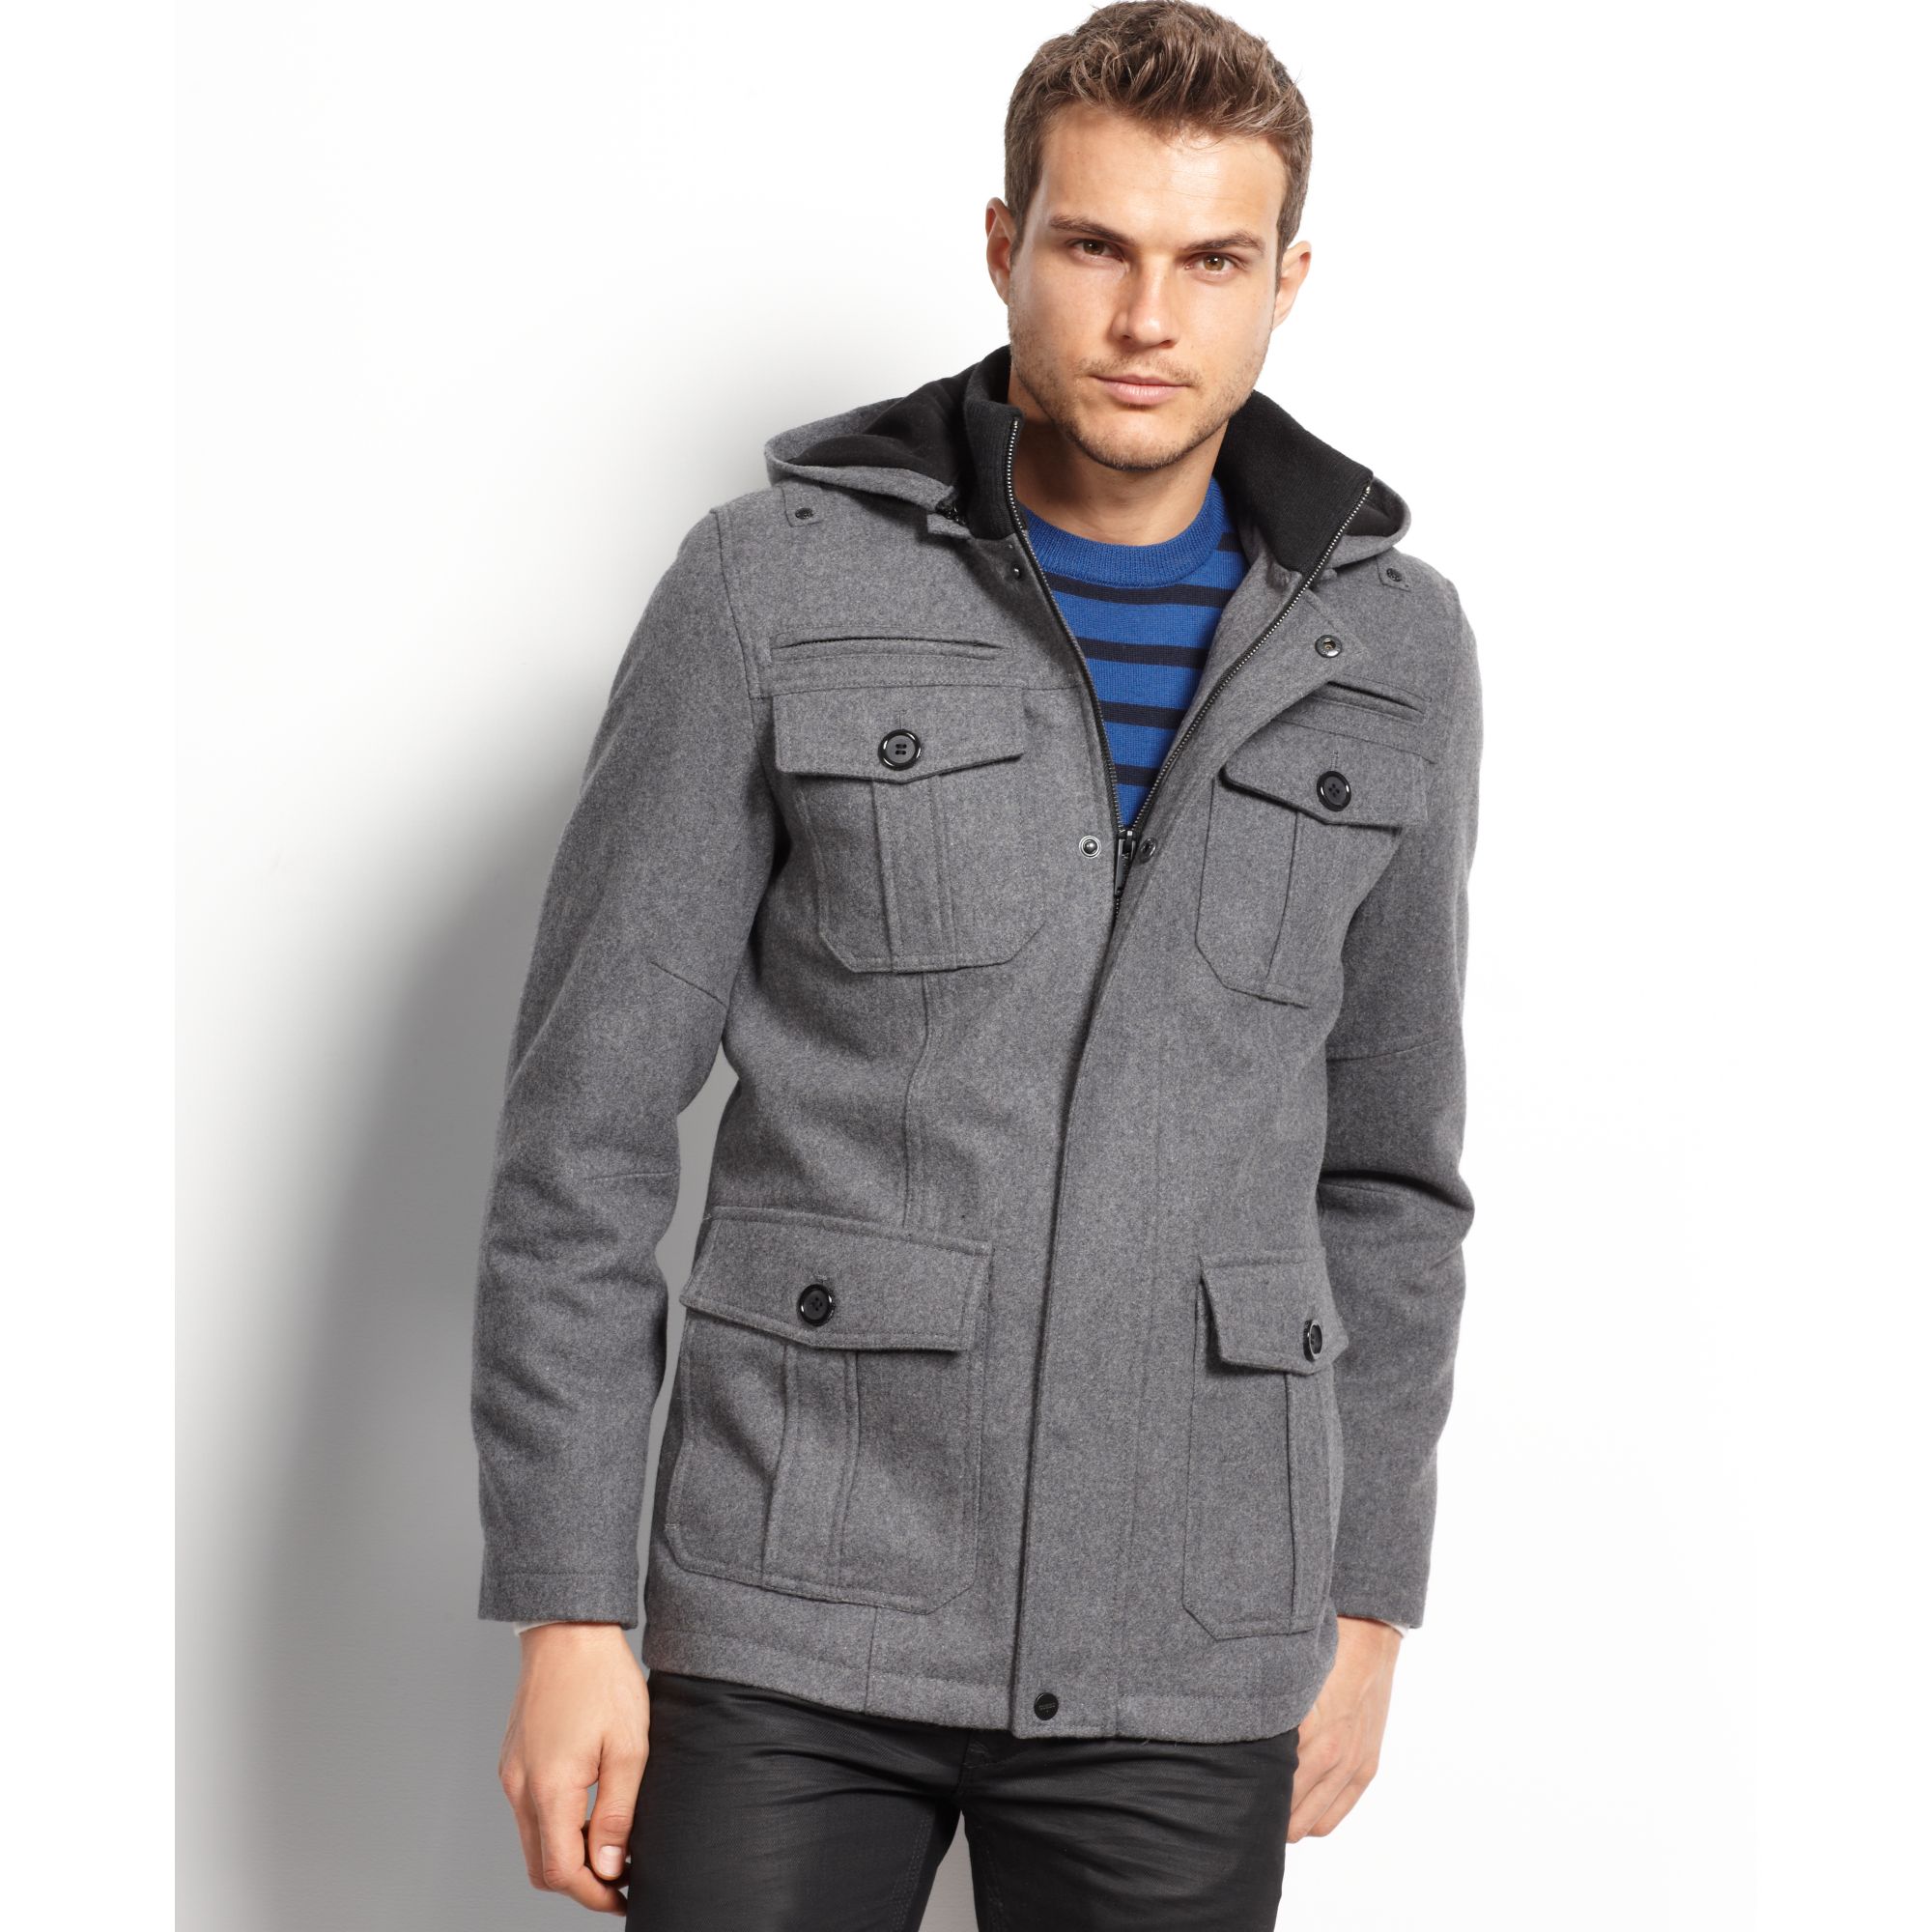 Lyst - Guess Coats Military Style Hooded Pea Coat in Gray for Men